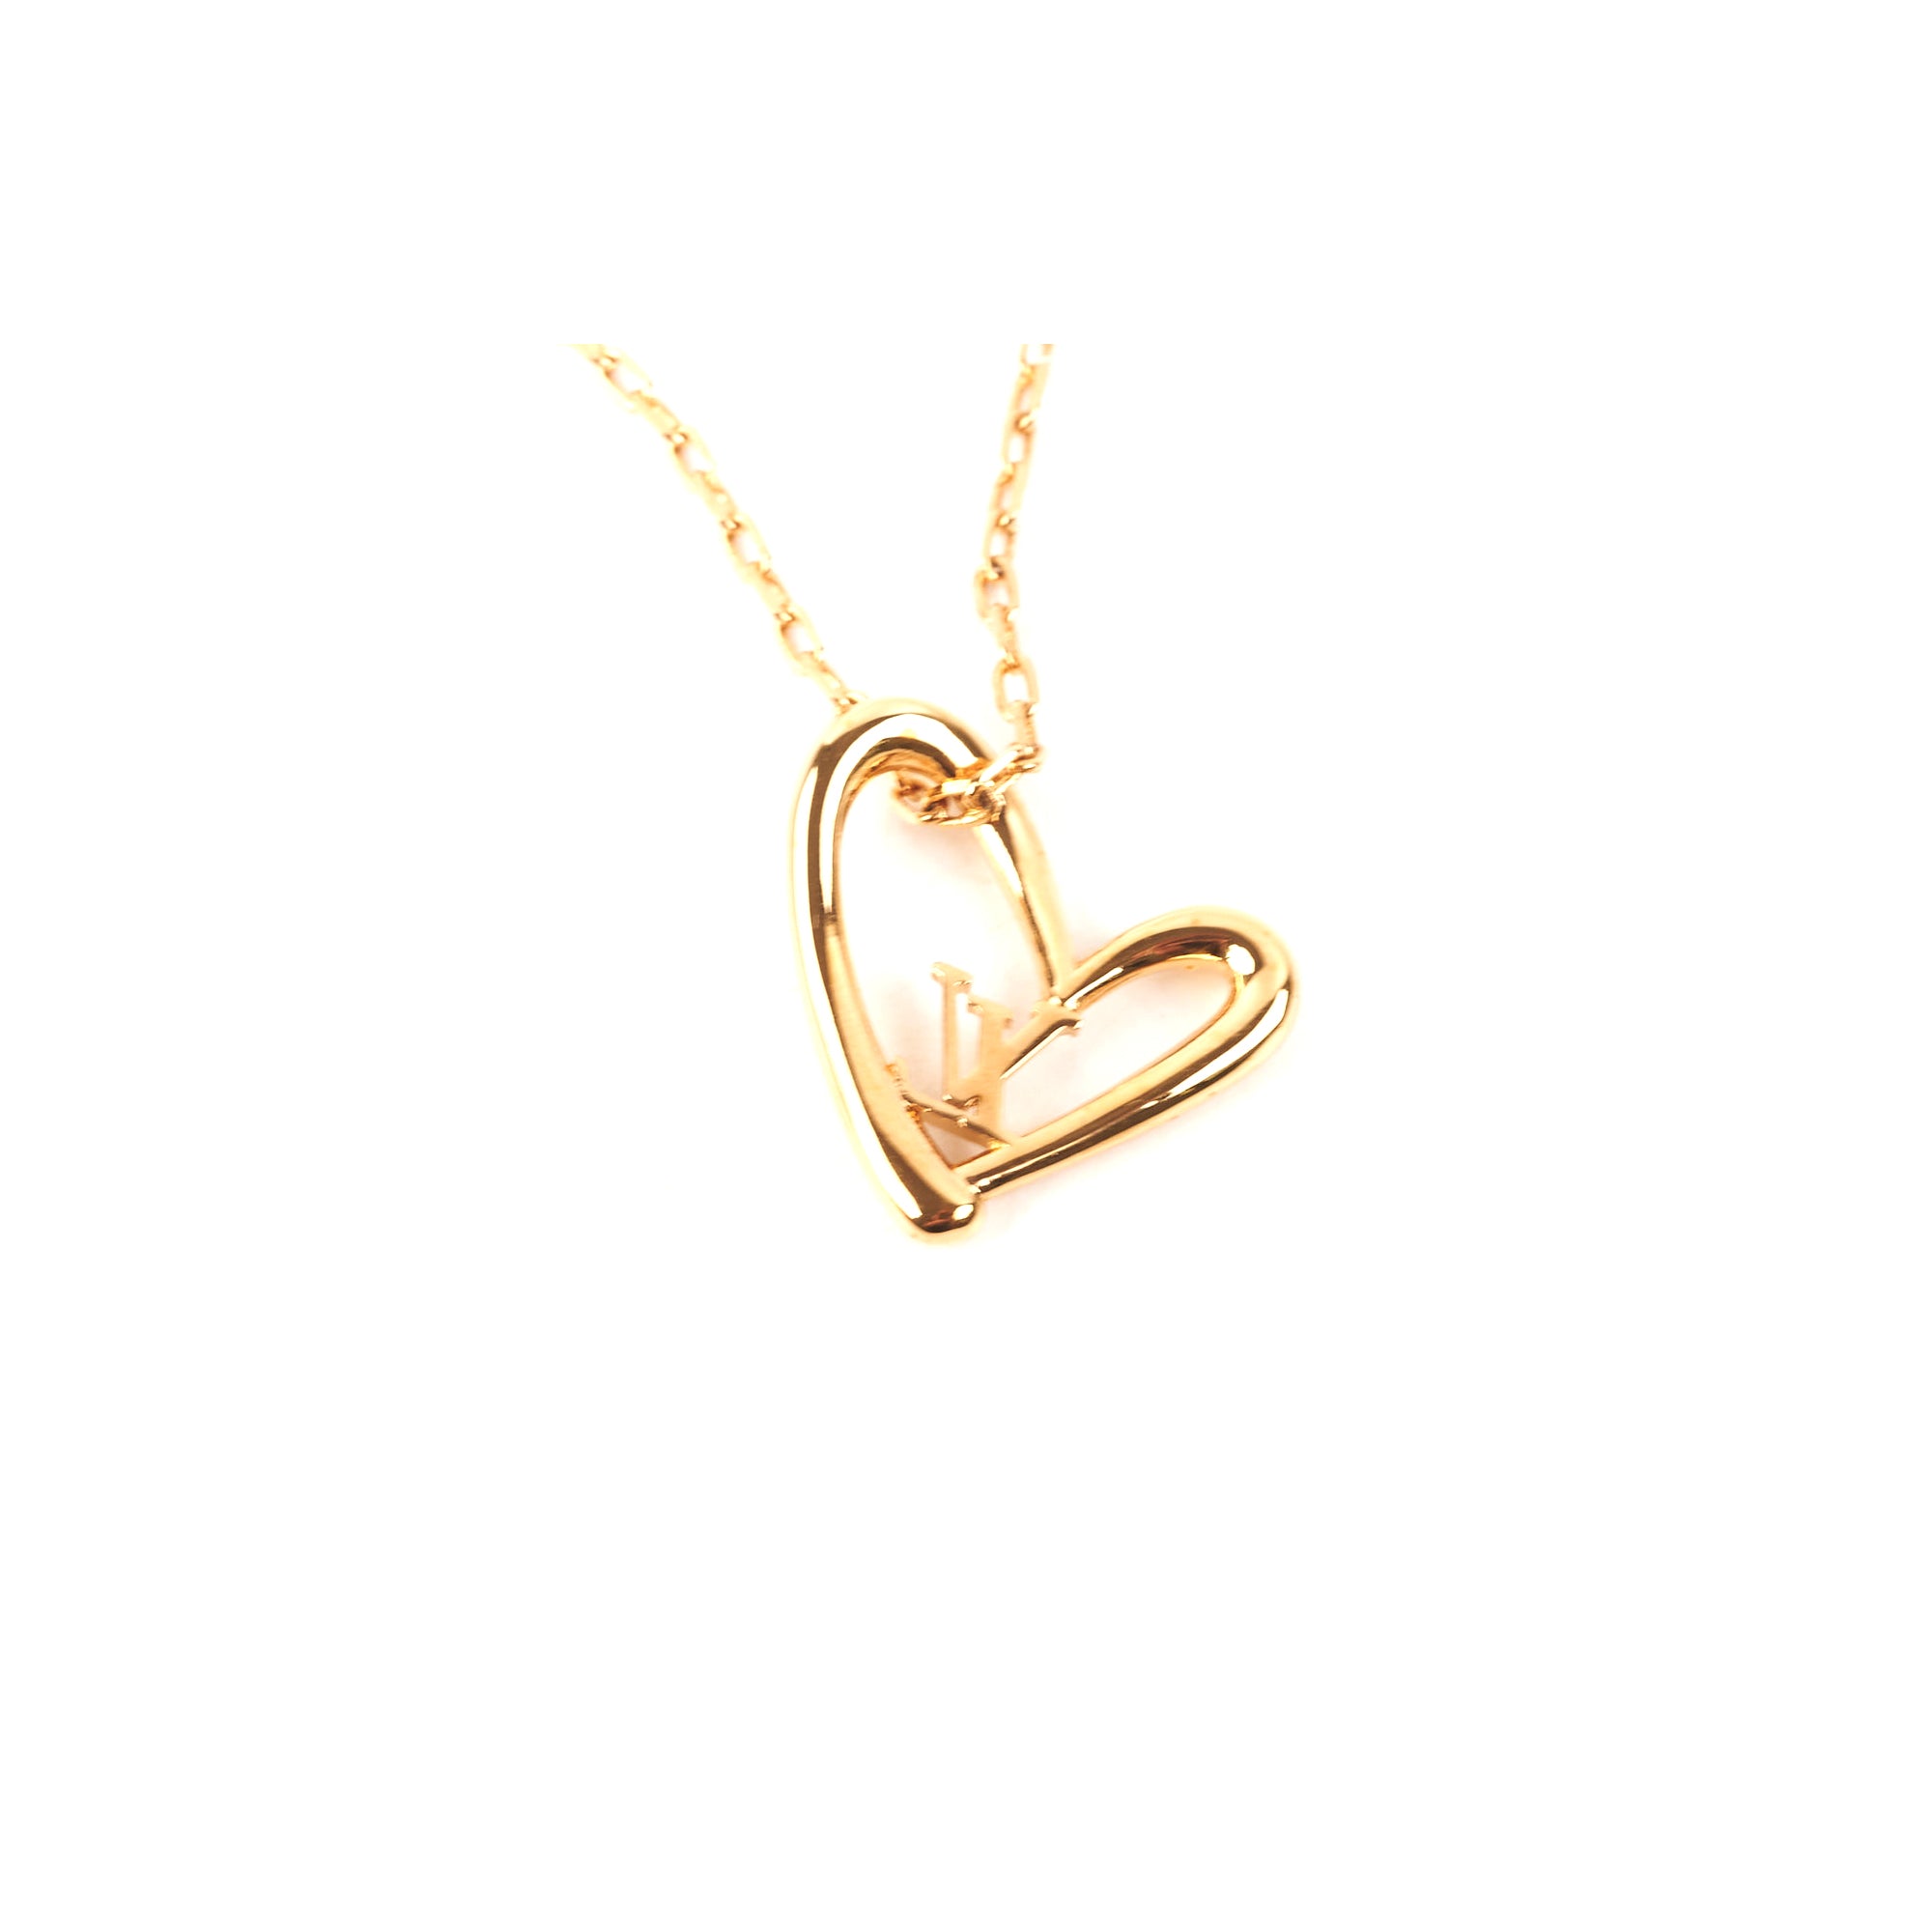 Shop Louis Vuitton Fall In Love Necklace (M00465) by lifeisfun